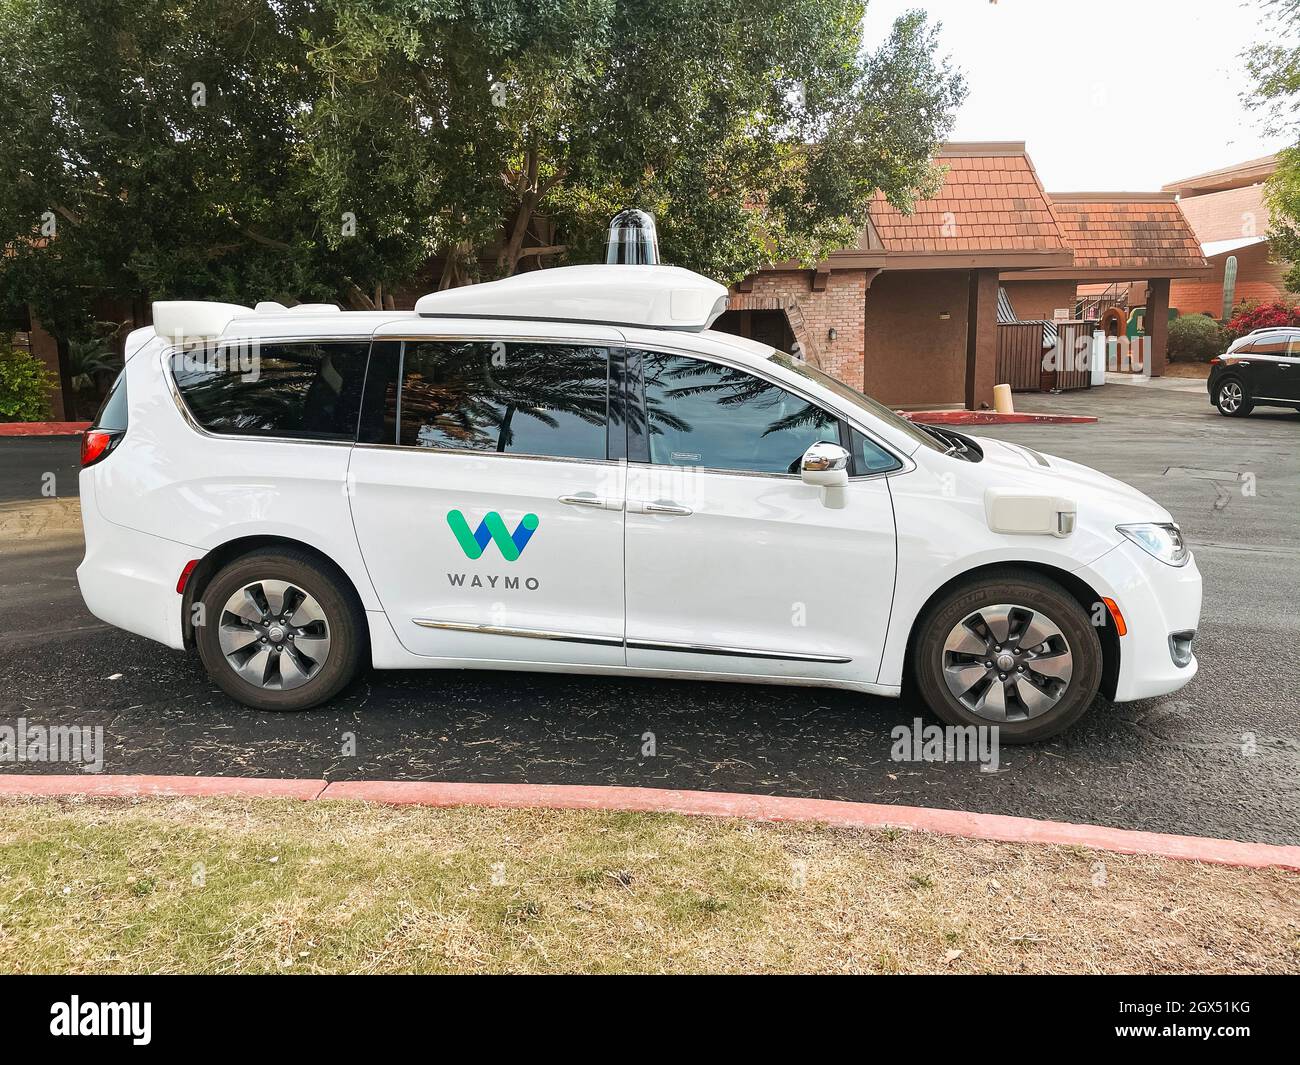 a Waymo self-driving car fitted with LiDAR sensors, navigates a parking lot in Tempe, Arizona Stock Photo